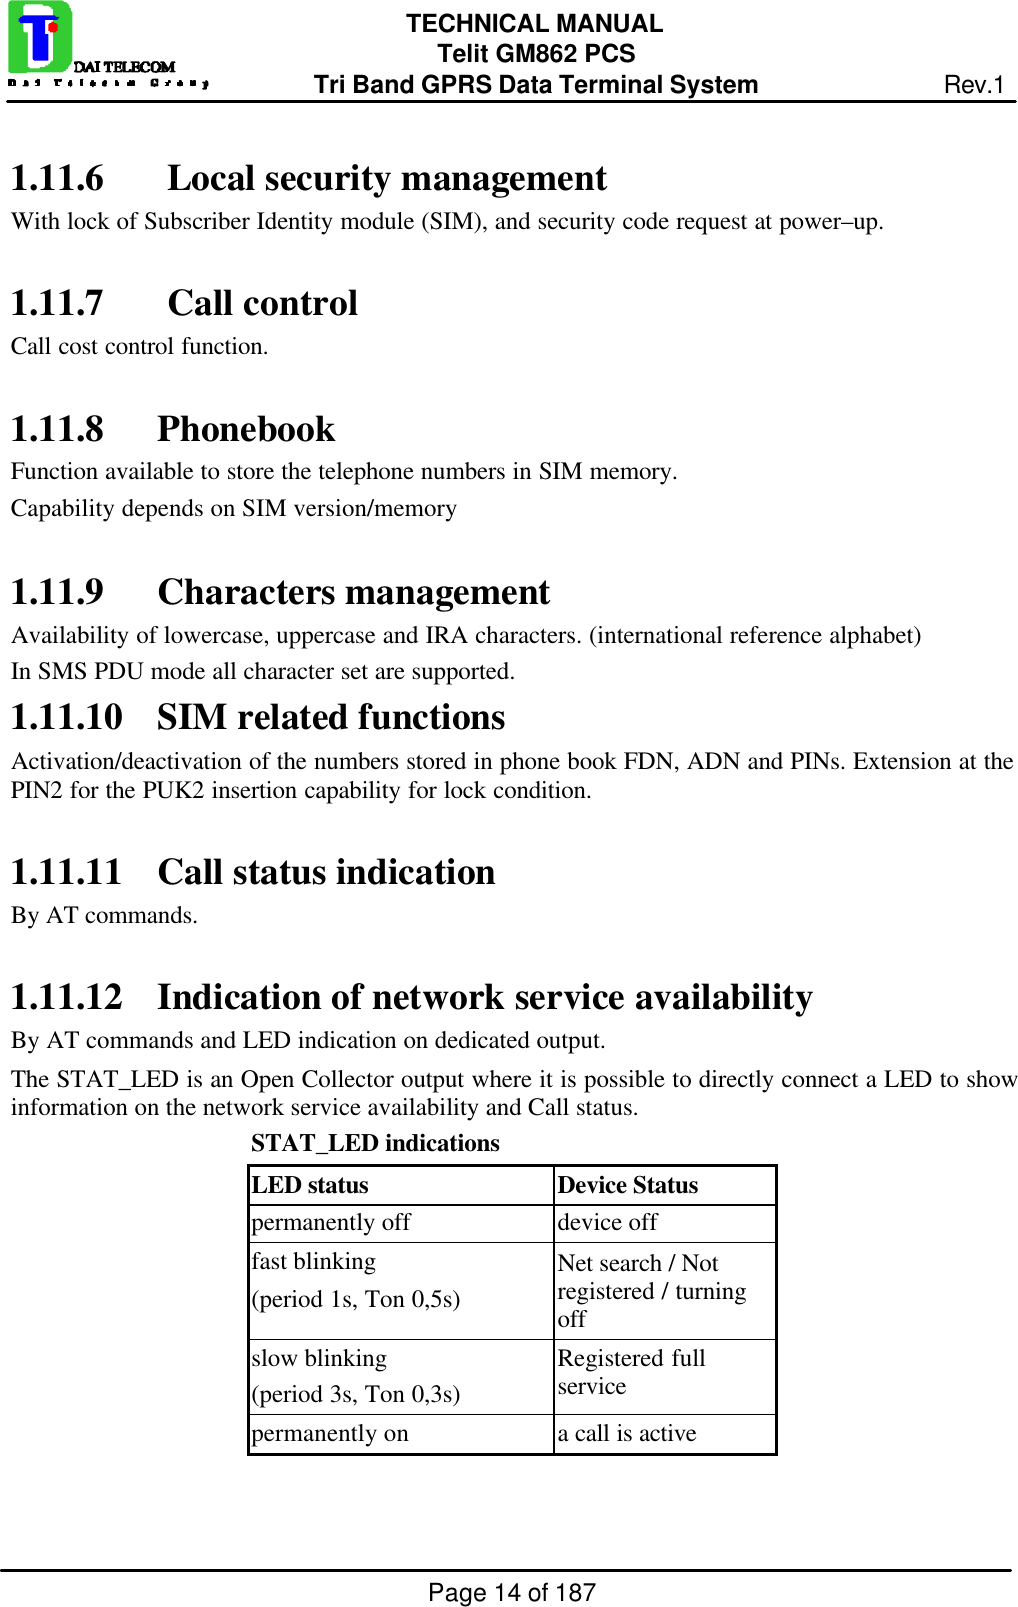 Page 14 of 187TECHNICAL MANUALTelit GM862 PCSTri Band GPRS Data Terminal System Rev.11.11.6  Local security managementWith lock of Subscriber Identity module (SIM), and security code request at power–up.1.11.7  Call controlCall cost control function.1.11.8 PhonebookFunction available to store the telephone numbers in SIM memory.Capability depends on SIM version/memory1.11.9 Characters managementAvailability of lowercase, uppercase and IRA characters. (international reference alphabet)In SMS PDU mode all character set are supported.1.11.10 SIM related functionsActivation/deactivation of the numbers stored in phone book FDN, ADN and PINs. Extension at thePIN2 for the PUK2 insertion capability for lock condition.1.11.11 Call status indicationBy AT commands.1.11.12 Indication of network service availabilityBy AT commands and LED indication on dedicated output.The STAT_LED is an Open Collector output where it is possible to directly connect a LED to showinformation on the network service availability and Call status.   STAT_LED indicationsLED status Device Statuspermanently off device offfast blinking(period 1s, Ton 0,5s)Net search / Notregistered / turningoffslow blinking(period 3s, Ton 0,3s)Registered fullservicepermanently on a call is active